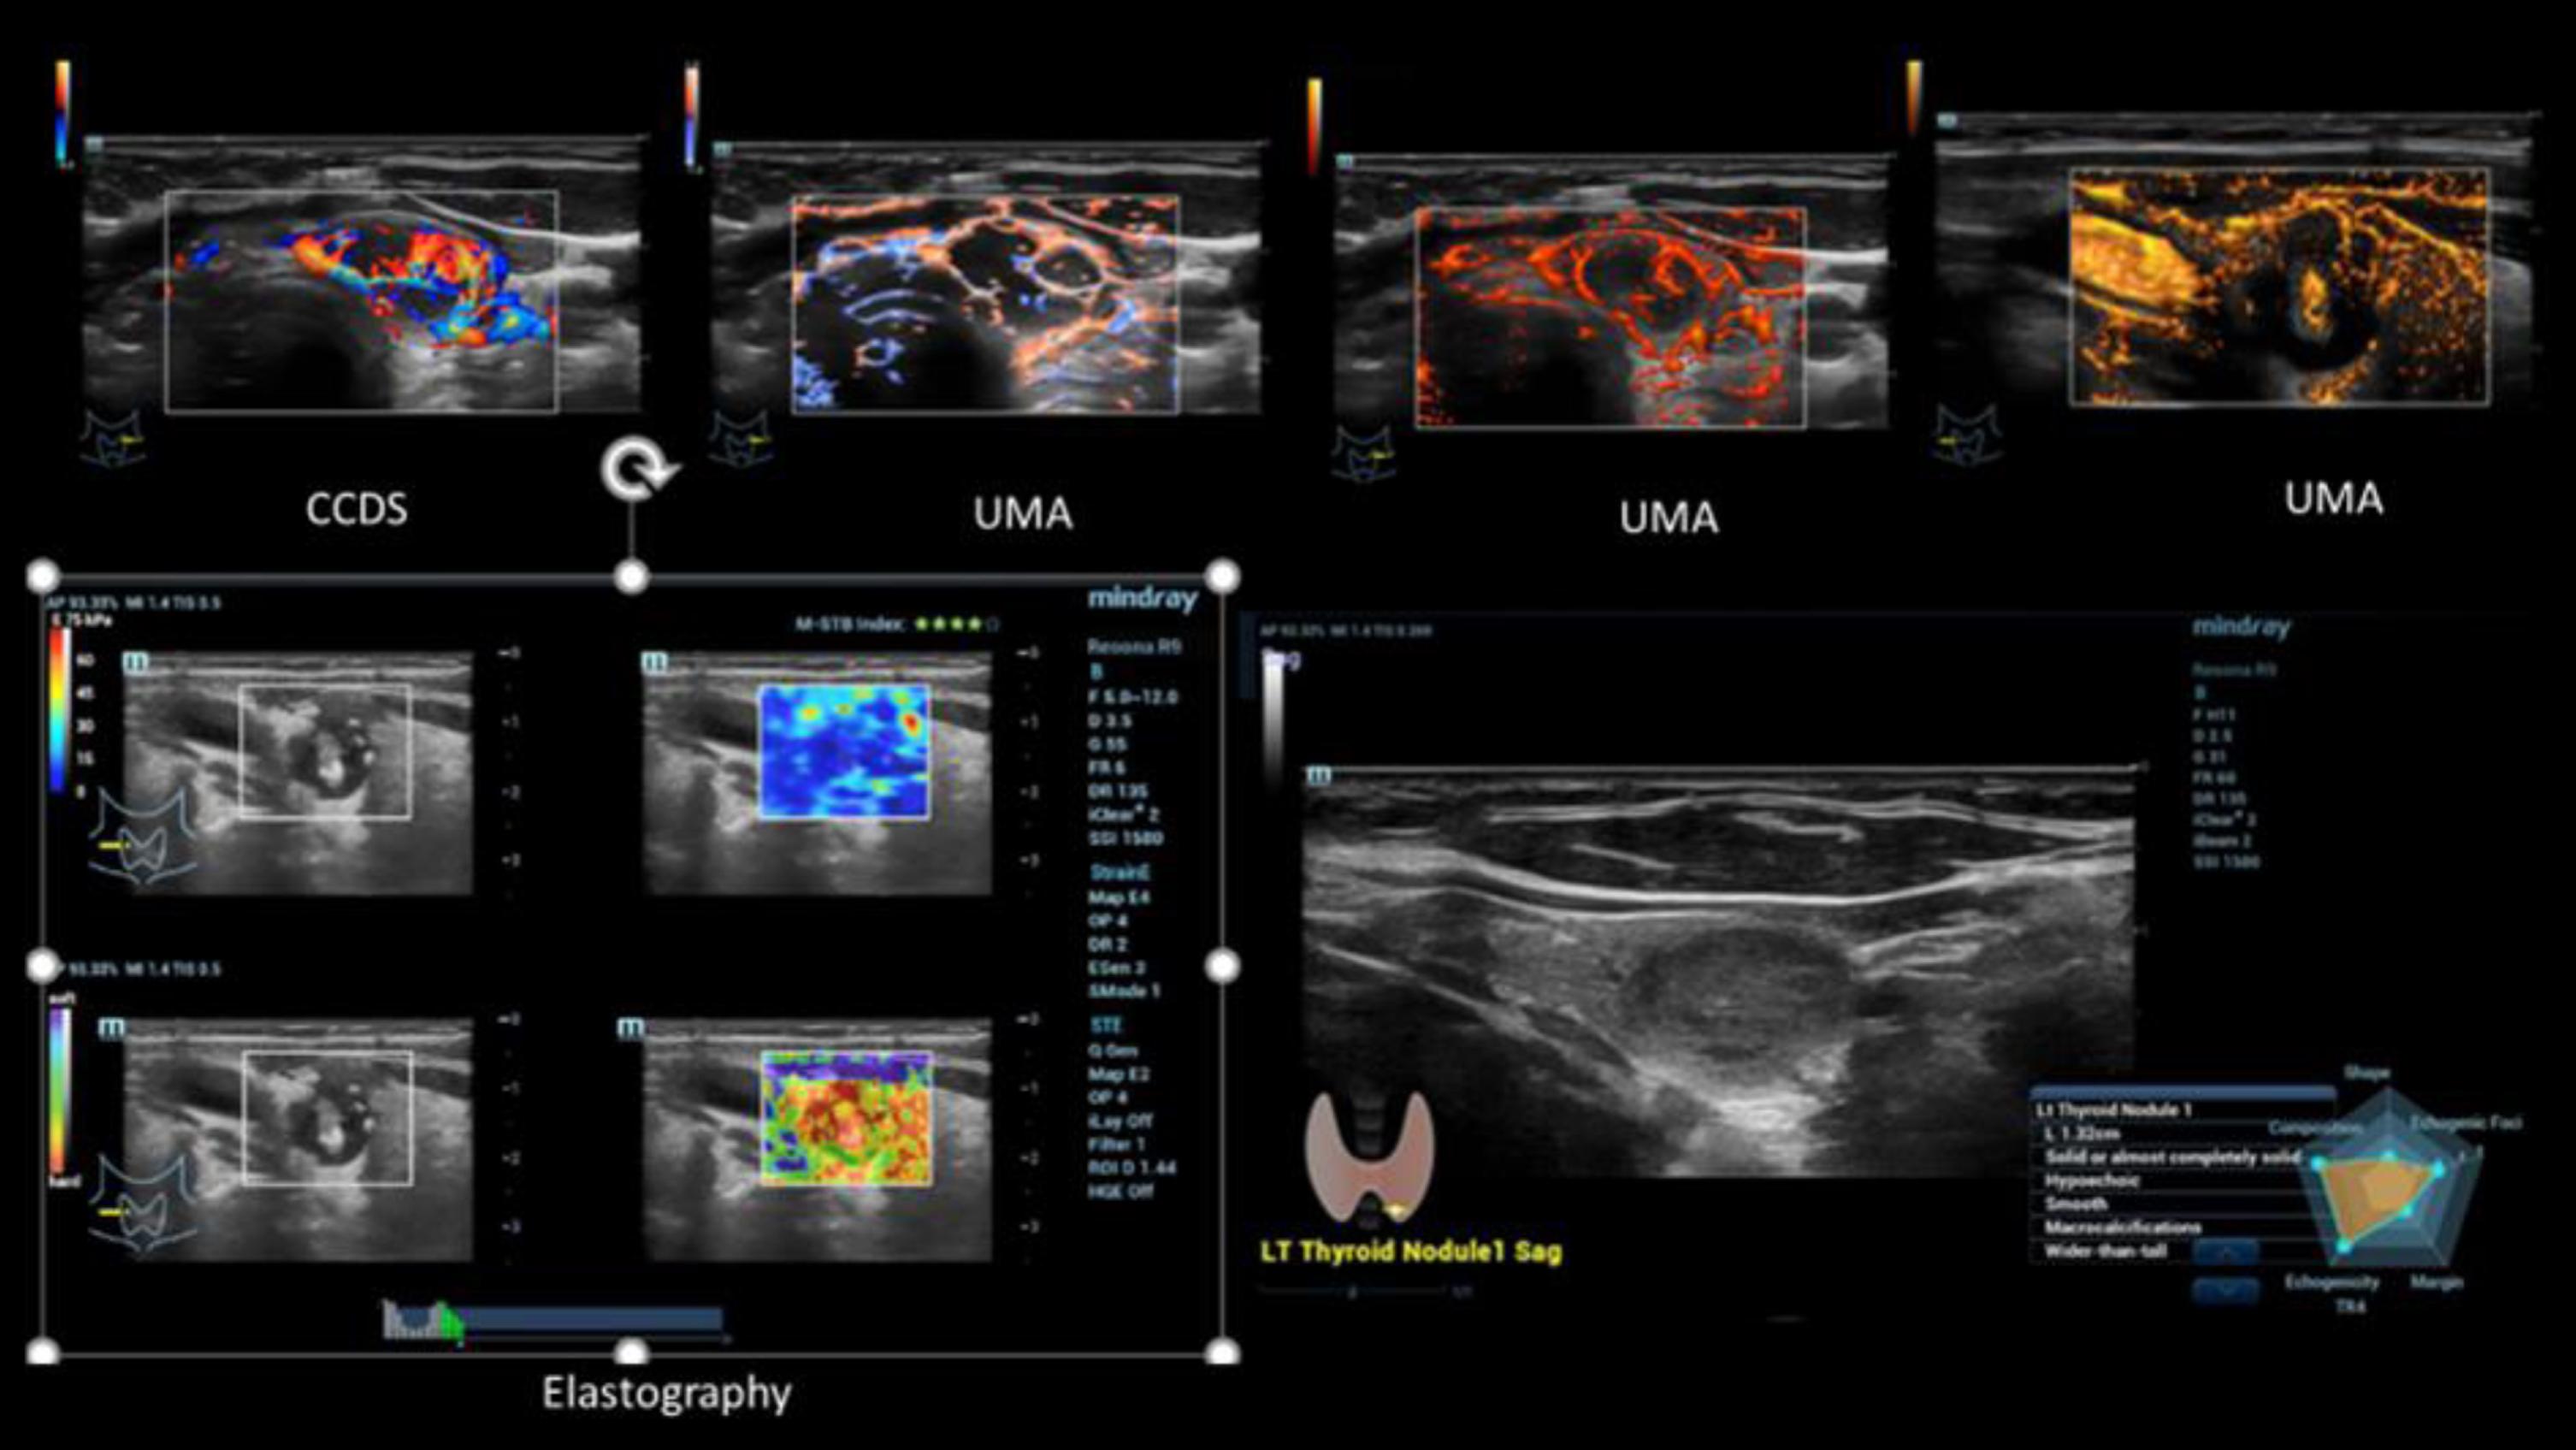 Case of a small intracystic papillary thyroid cancer (TI-RADS IV). Irregular vascularization detected by CCDS and UMA in different color modalities (upper line). Irregular stiffness detected by simultaneous mode of strain and shear wave elastography (left down). Characterization by B-Mode criteria using AI (right down).